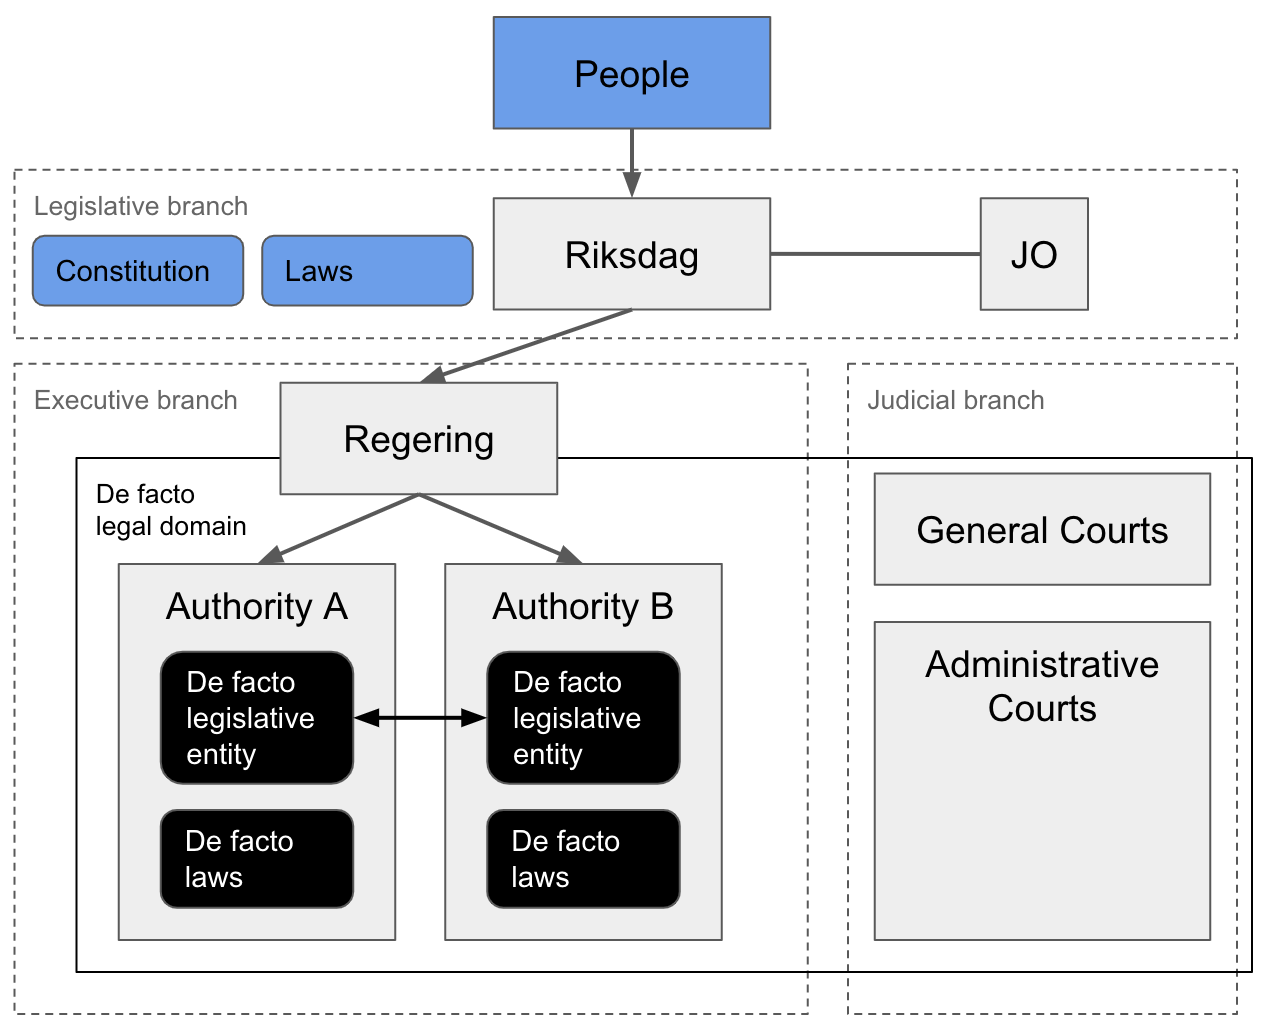 A third model of the Swedish de facto system of government